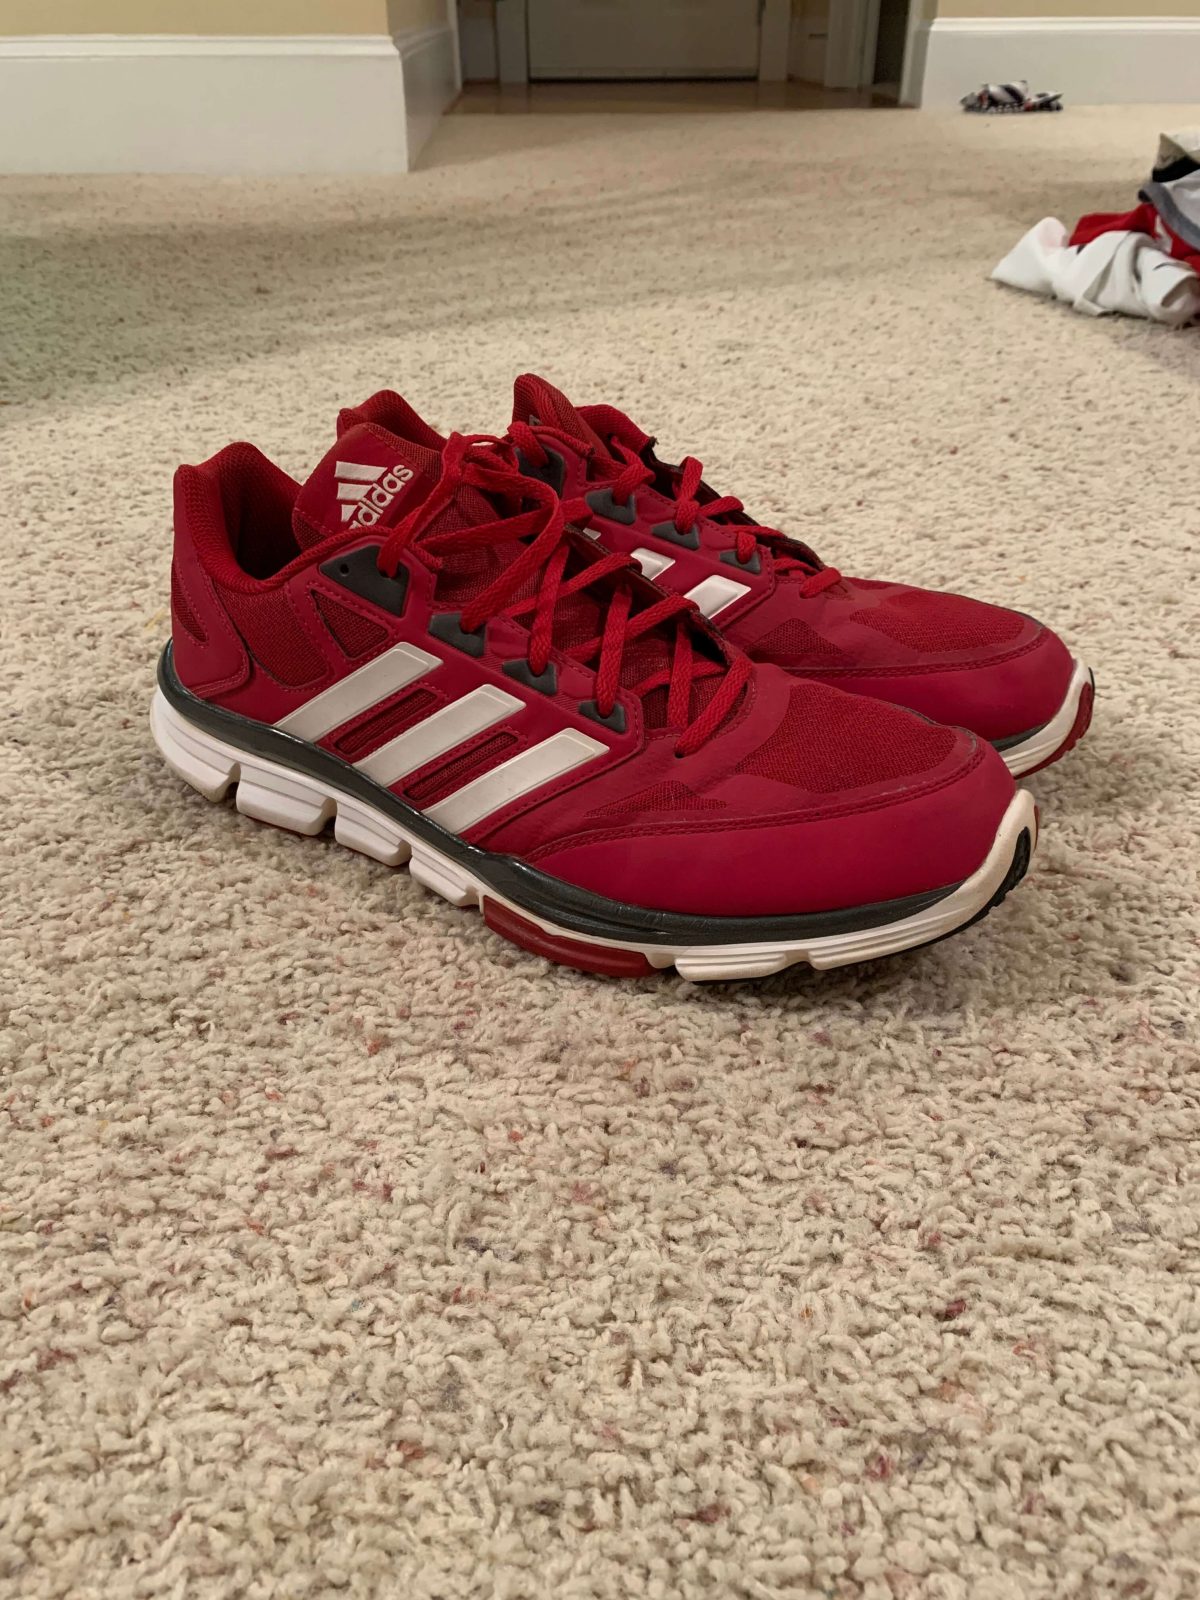 nc state adidas shoes